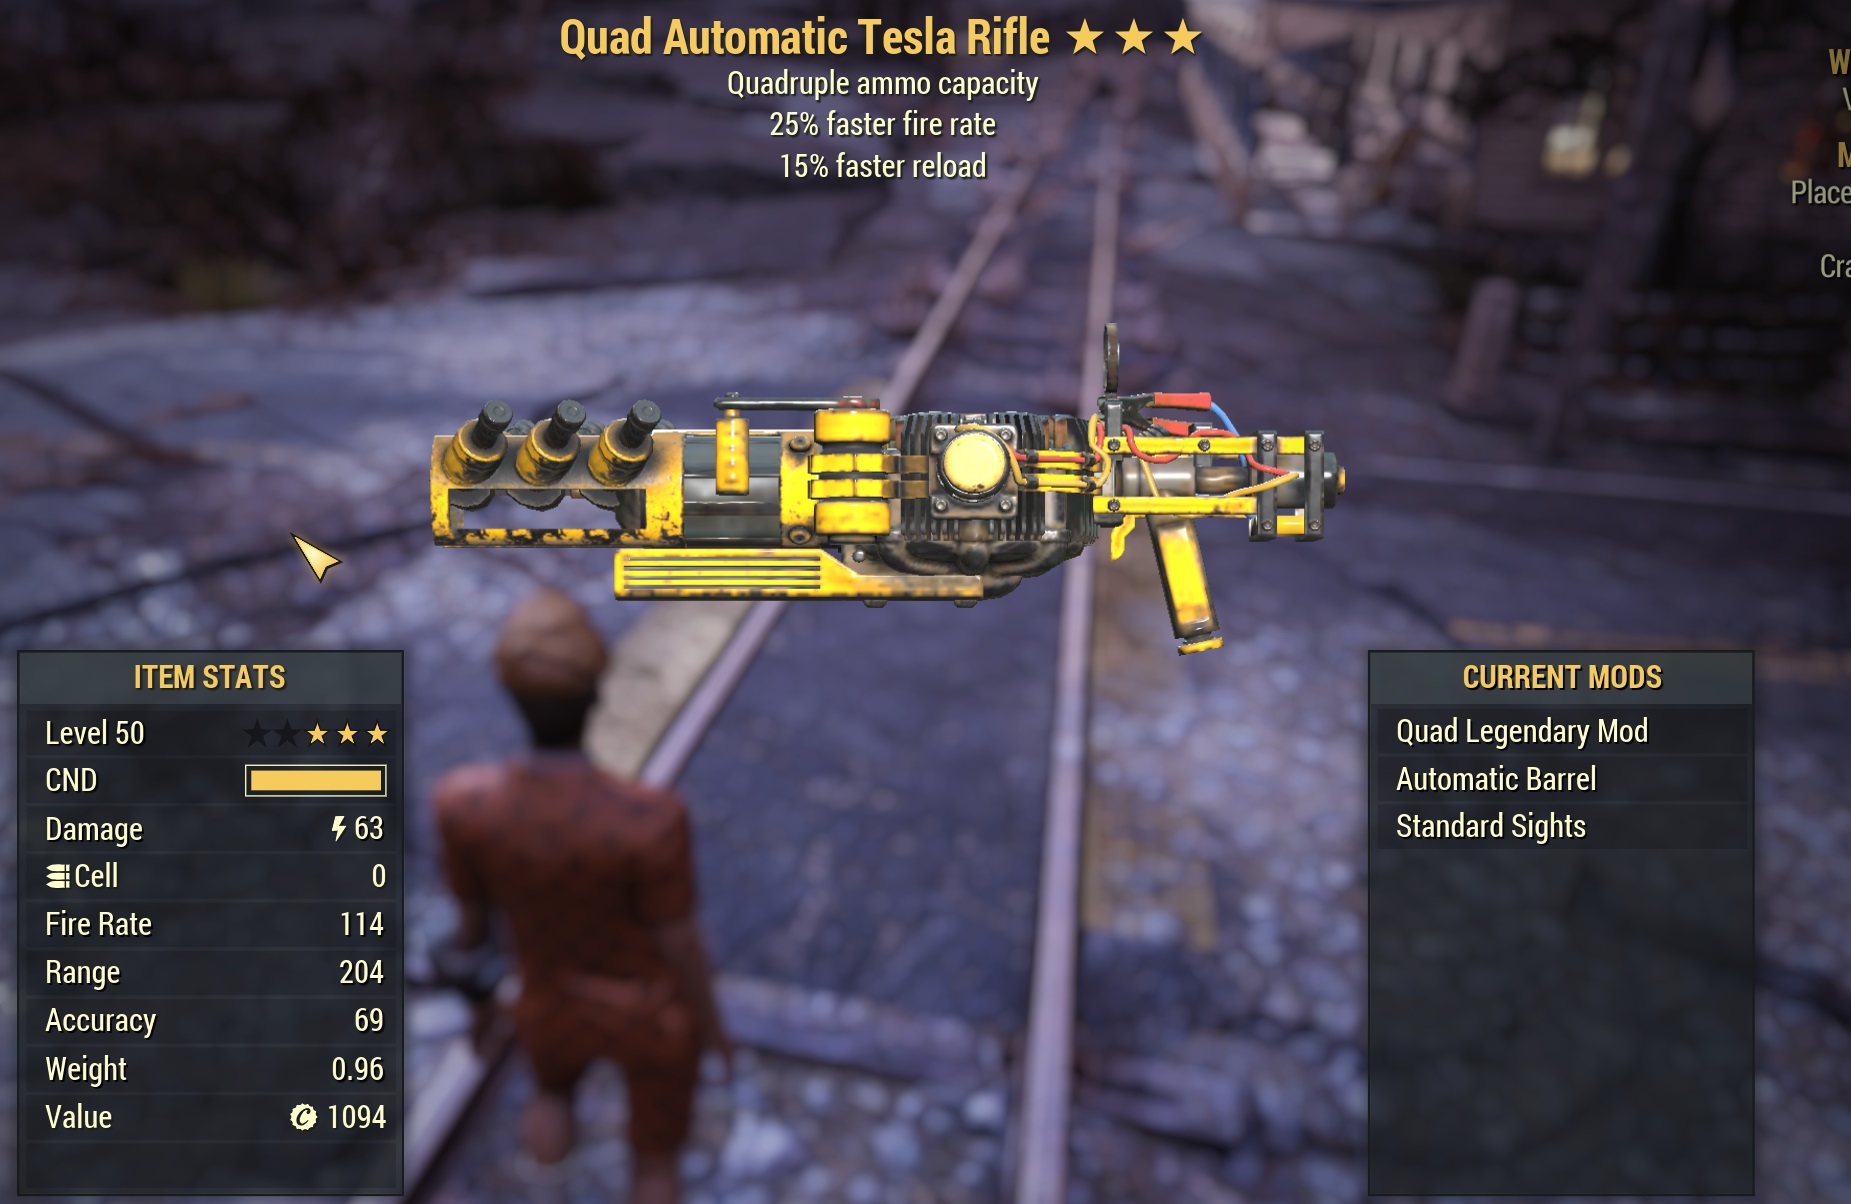 Quad Tesla Rifle [25% faster fire rate | 15% faster reload speed]